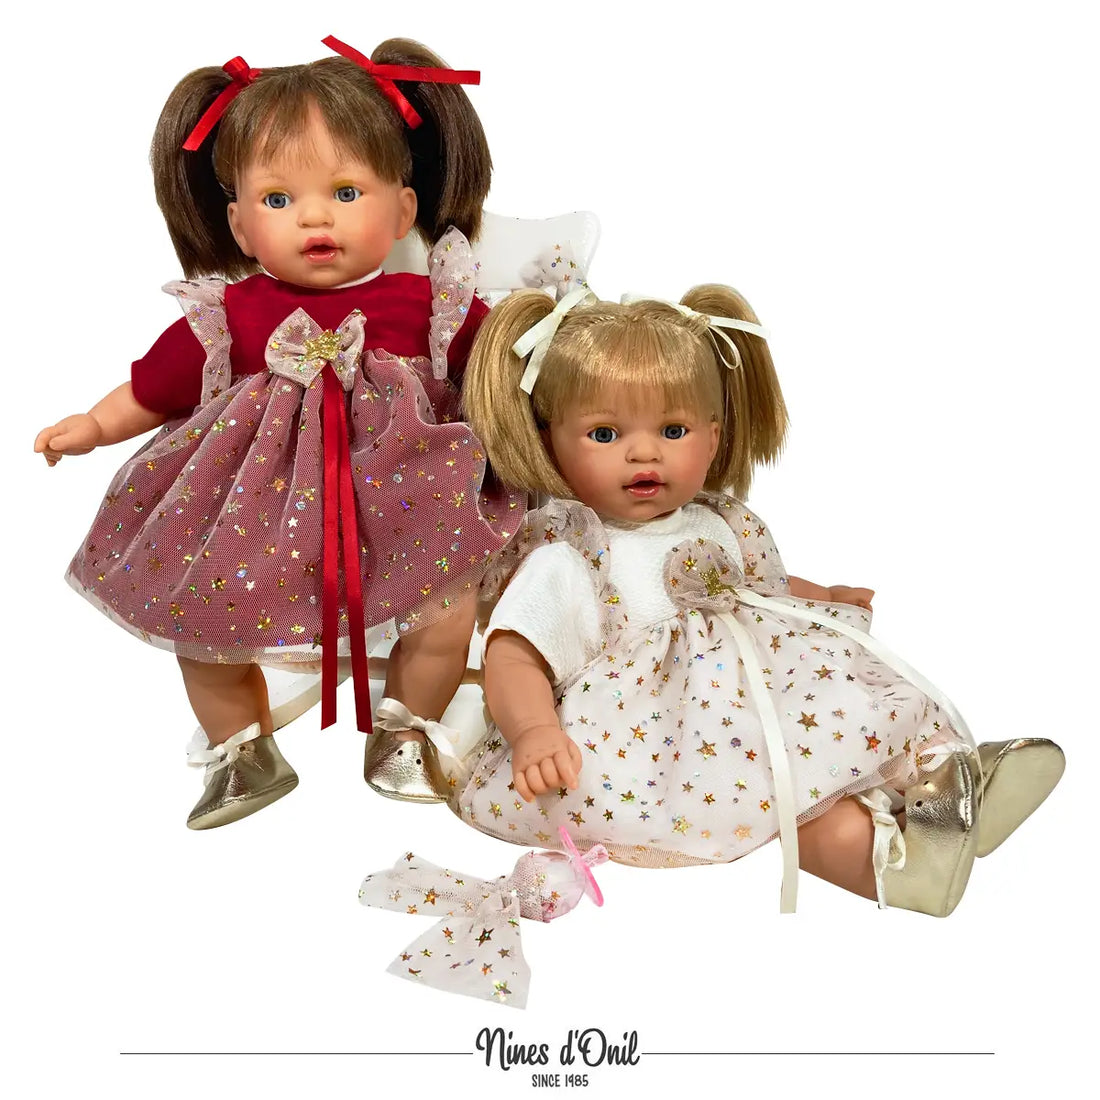 Handcrafted Collectible Alex (Red Dress) Christmas Baby Doll by Nines D&